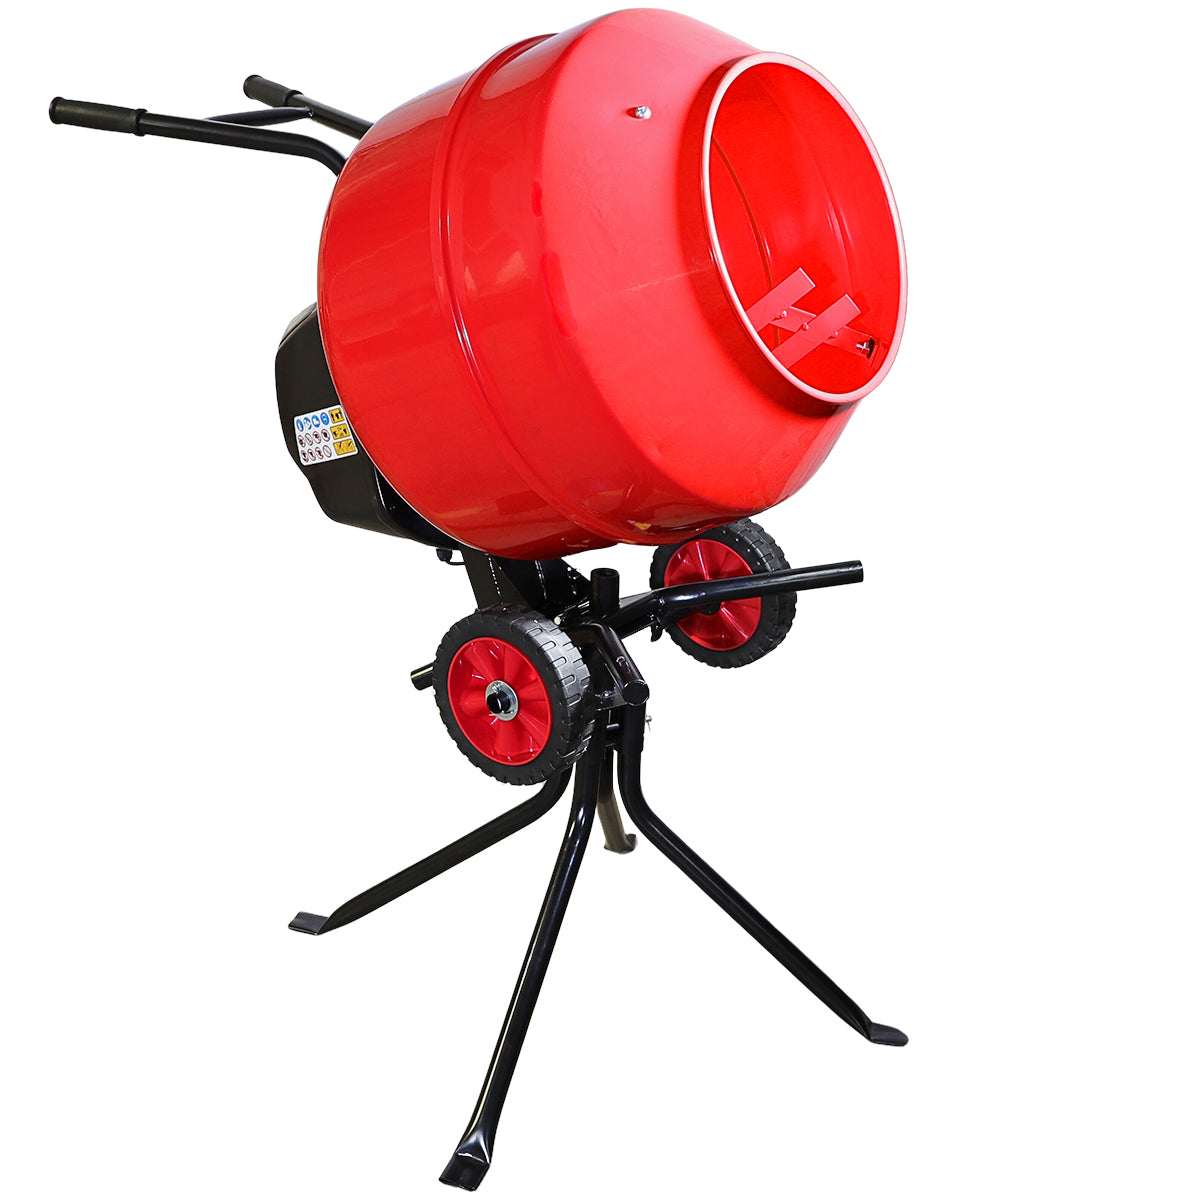 Excel 160L Portable Cement Mixer 240V/650W with Wheels